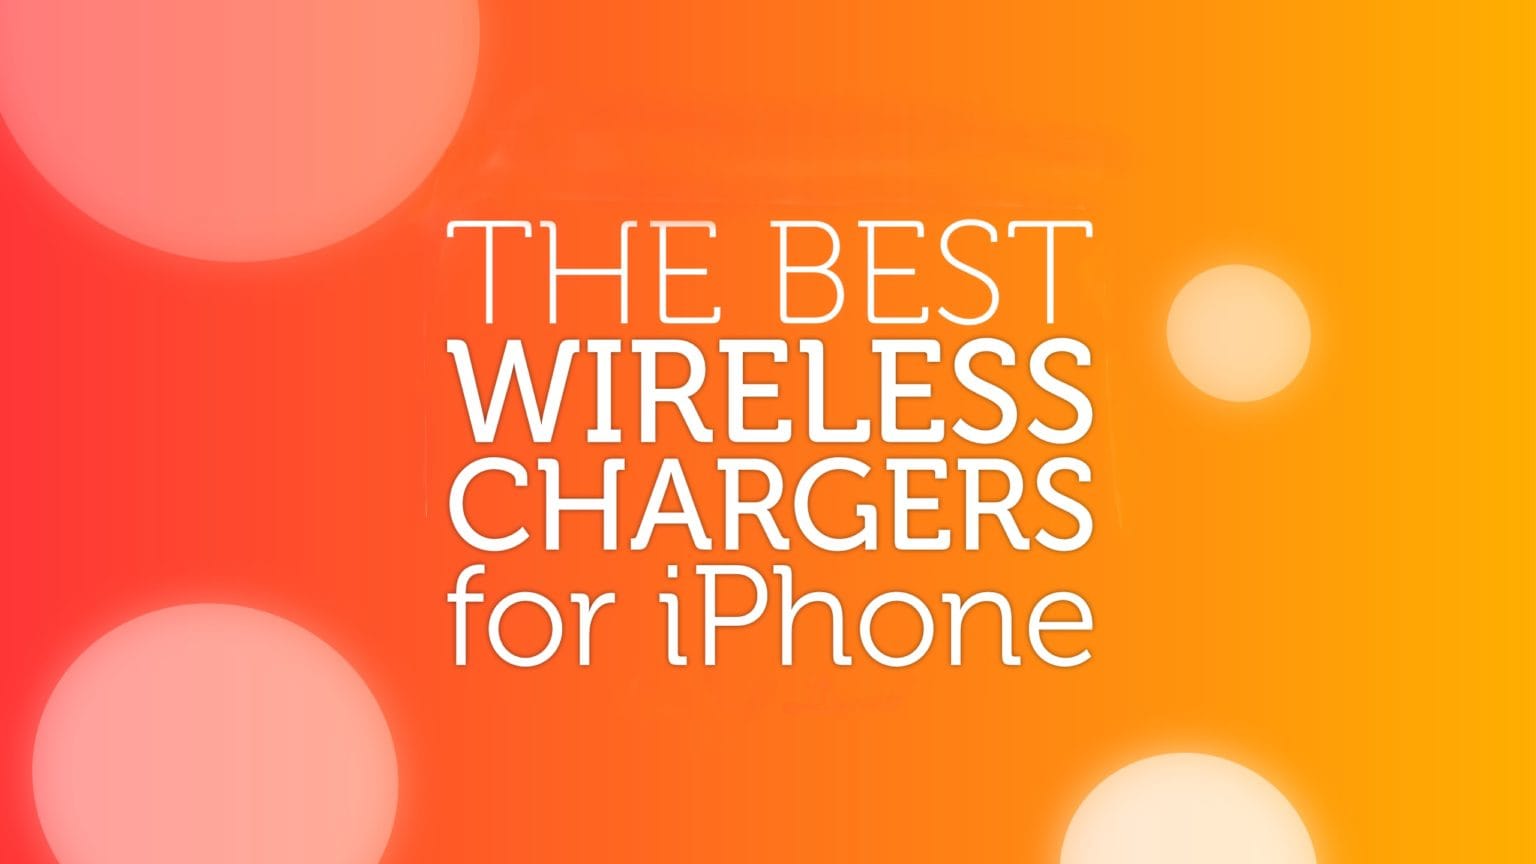 Best wireless chargers for iPhone